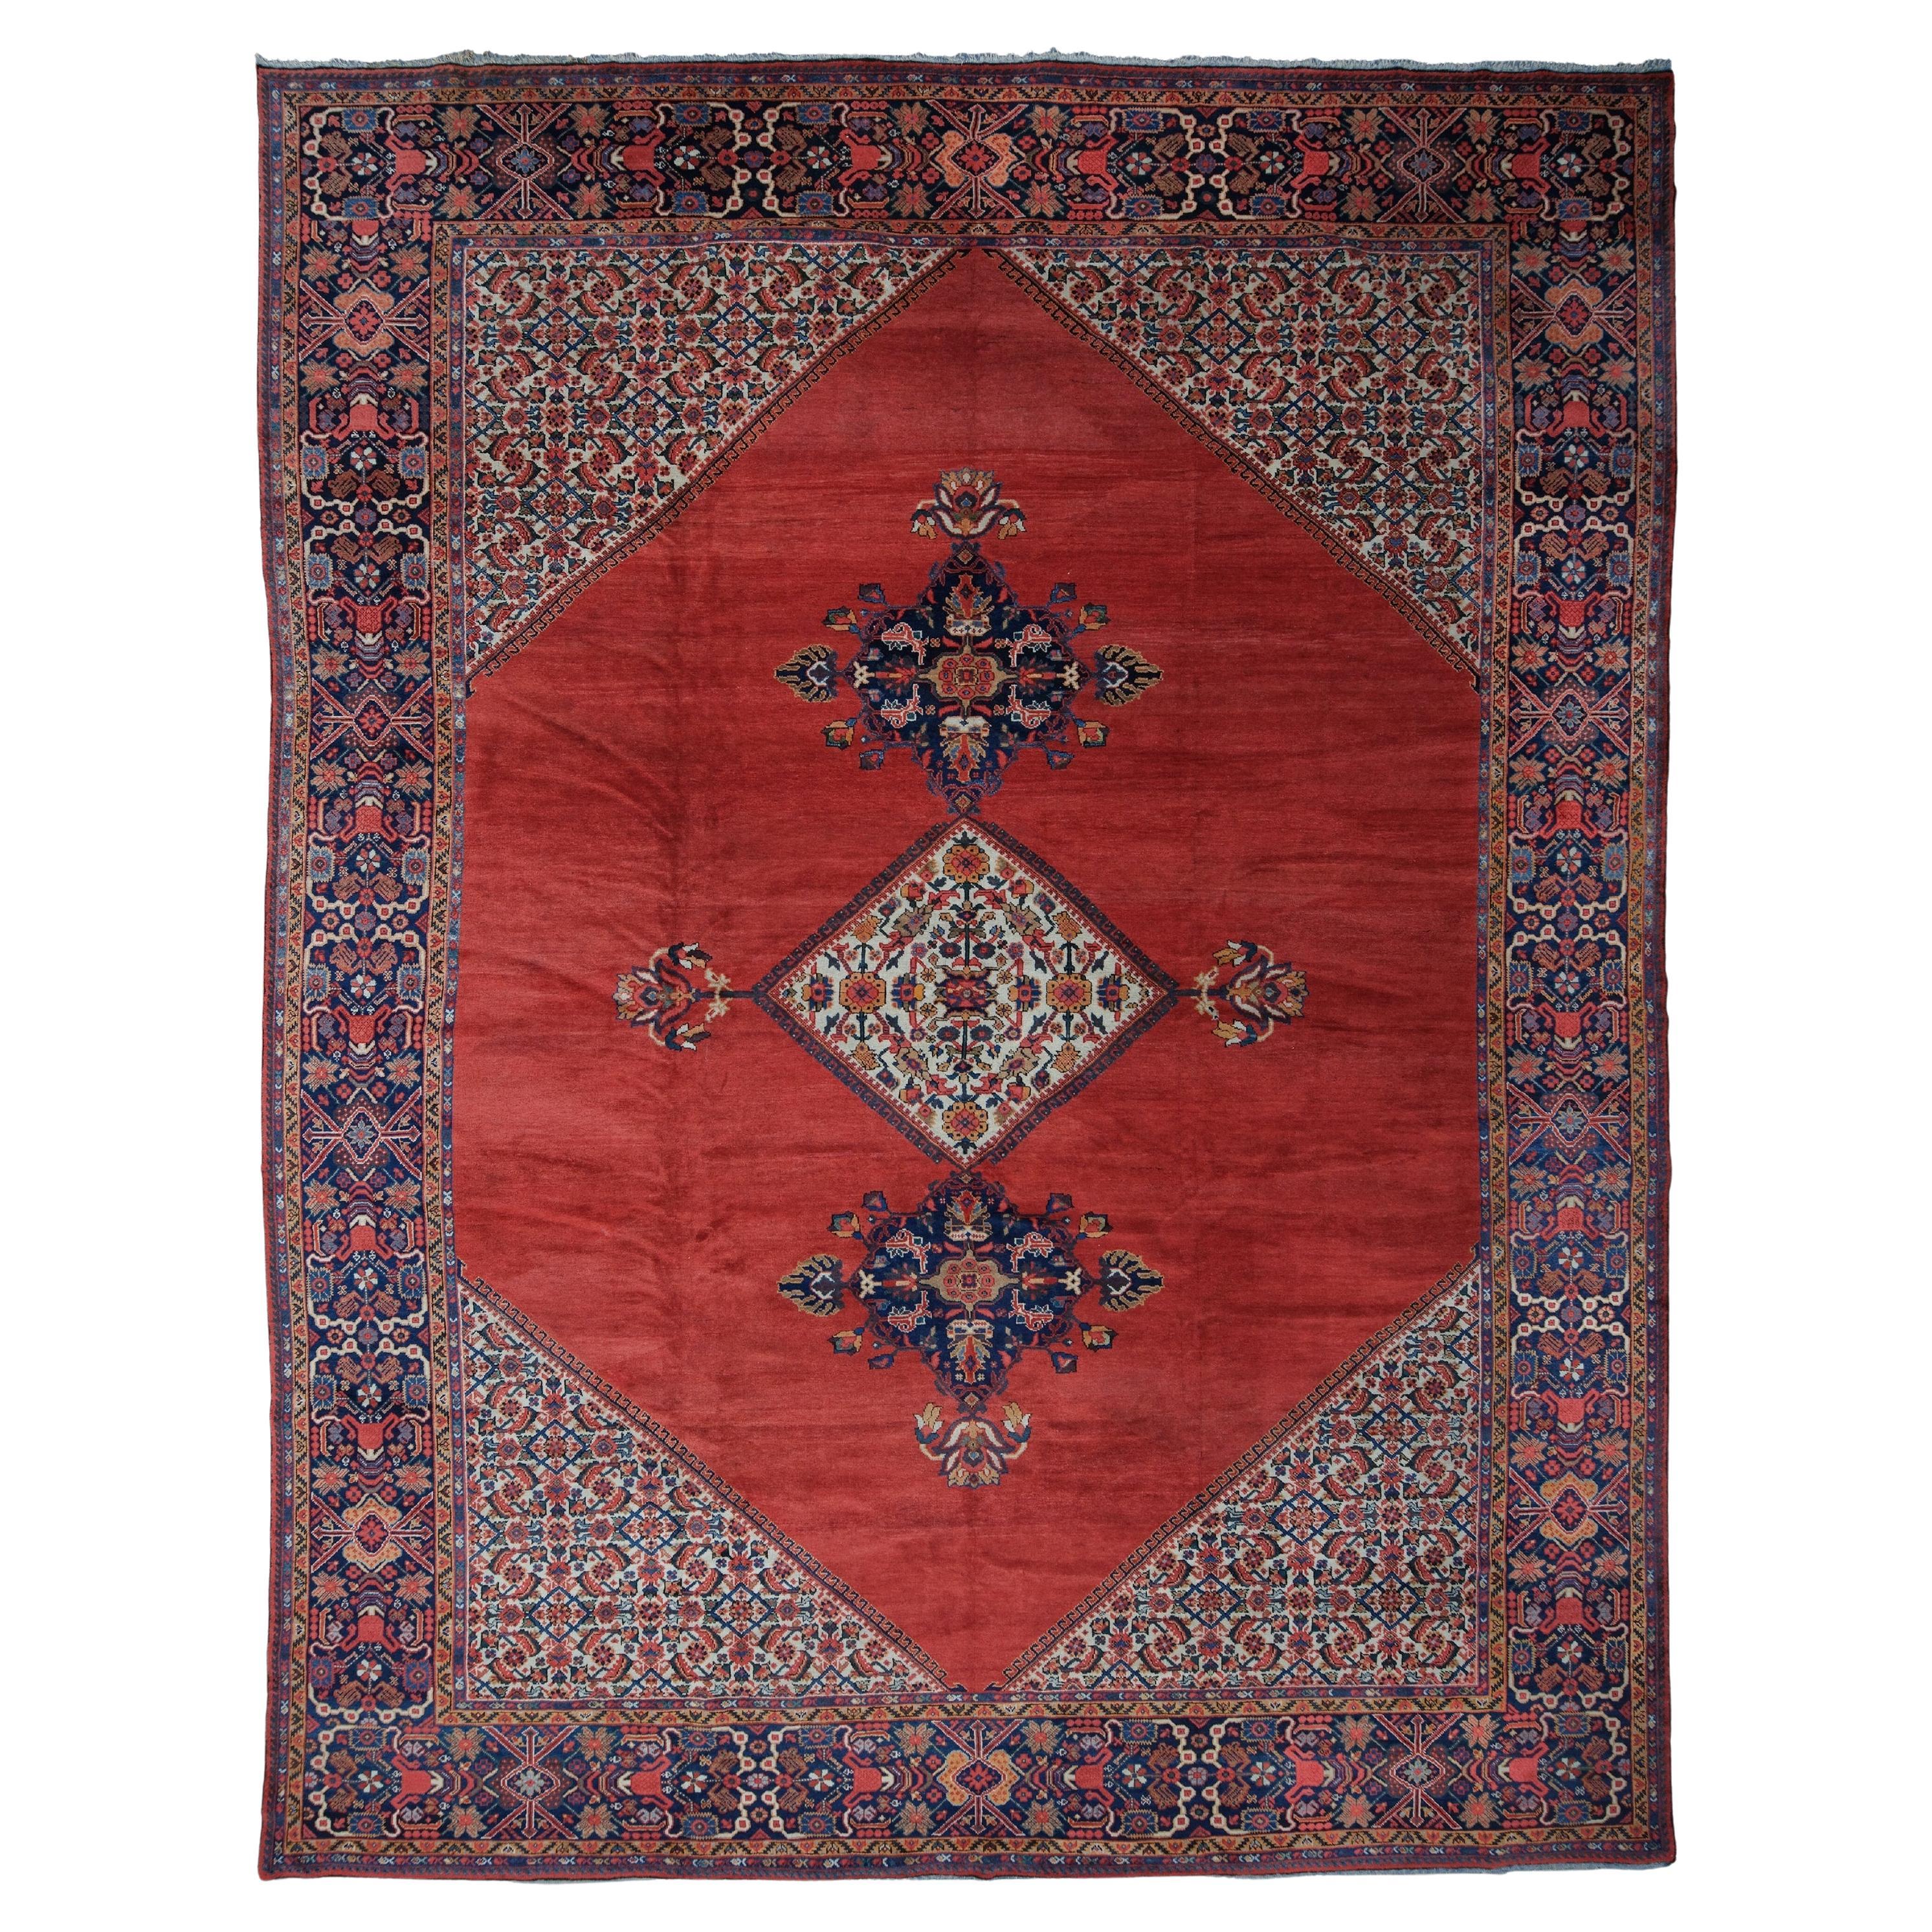 Antique Mahal Rug - Late of 19th Century Mahal Rug, Antique Rug, Handmade Rug For Sale